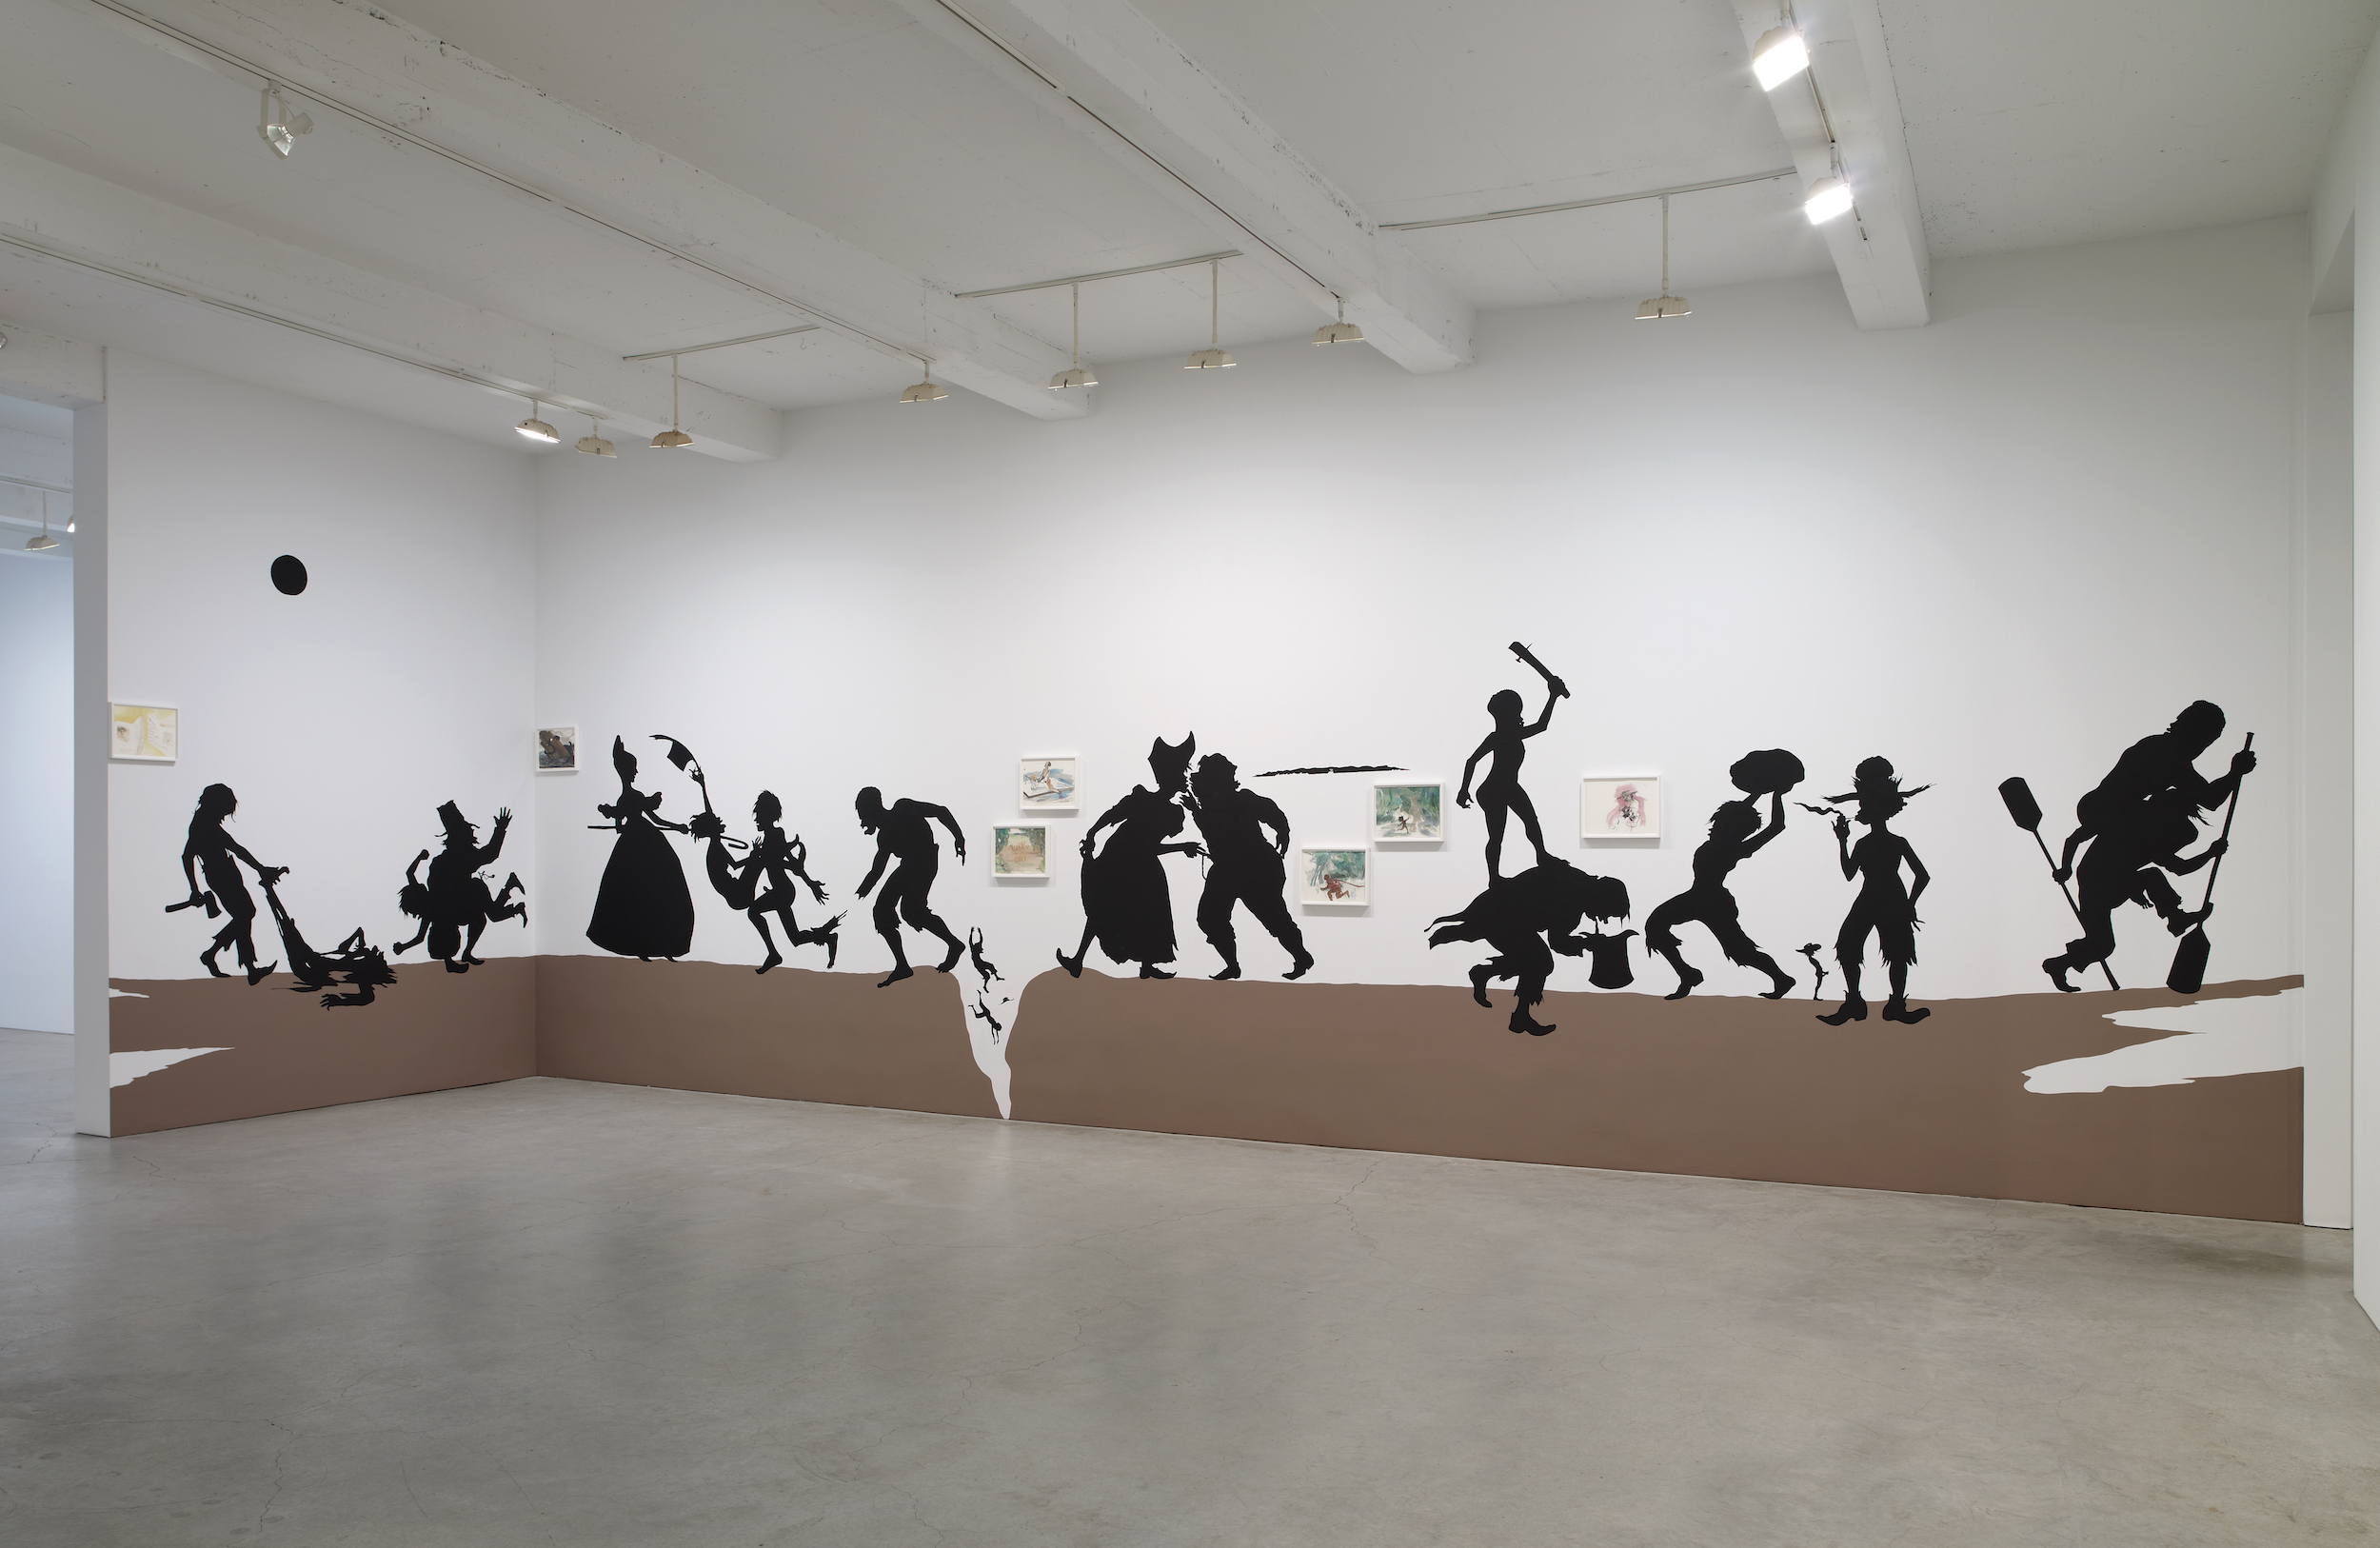  Kara Walker,&nbsp; The Nigger Huck Finn Pursues Happiness Beyond the Narrow Constraints of your Overdetermined Thesis on Freedom - Drawn and Quartered by Mister Kara Walkerberry, with Condolences to The Authors , 2010. Cut paper and paint on wall; g